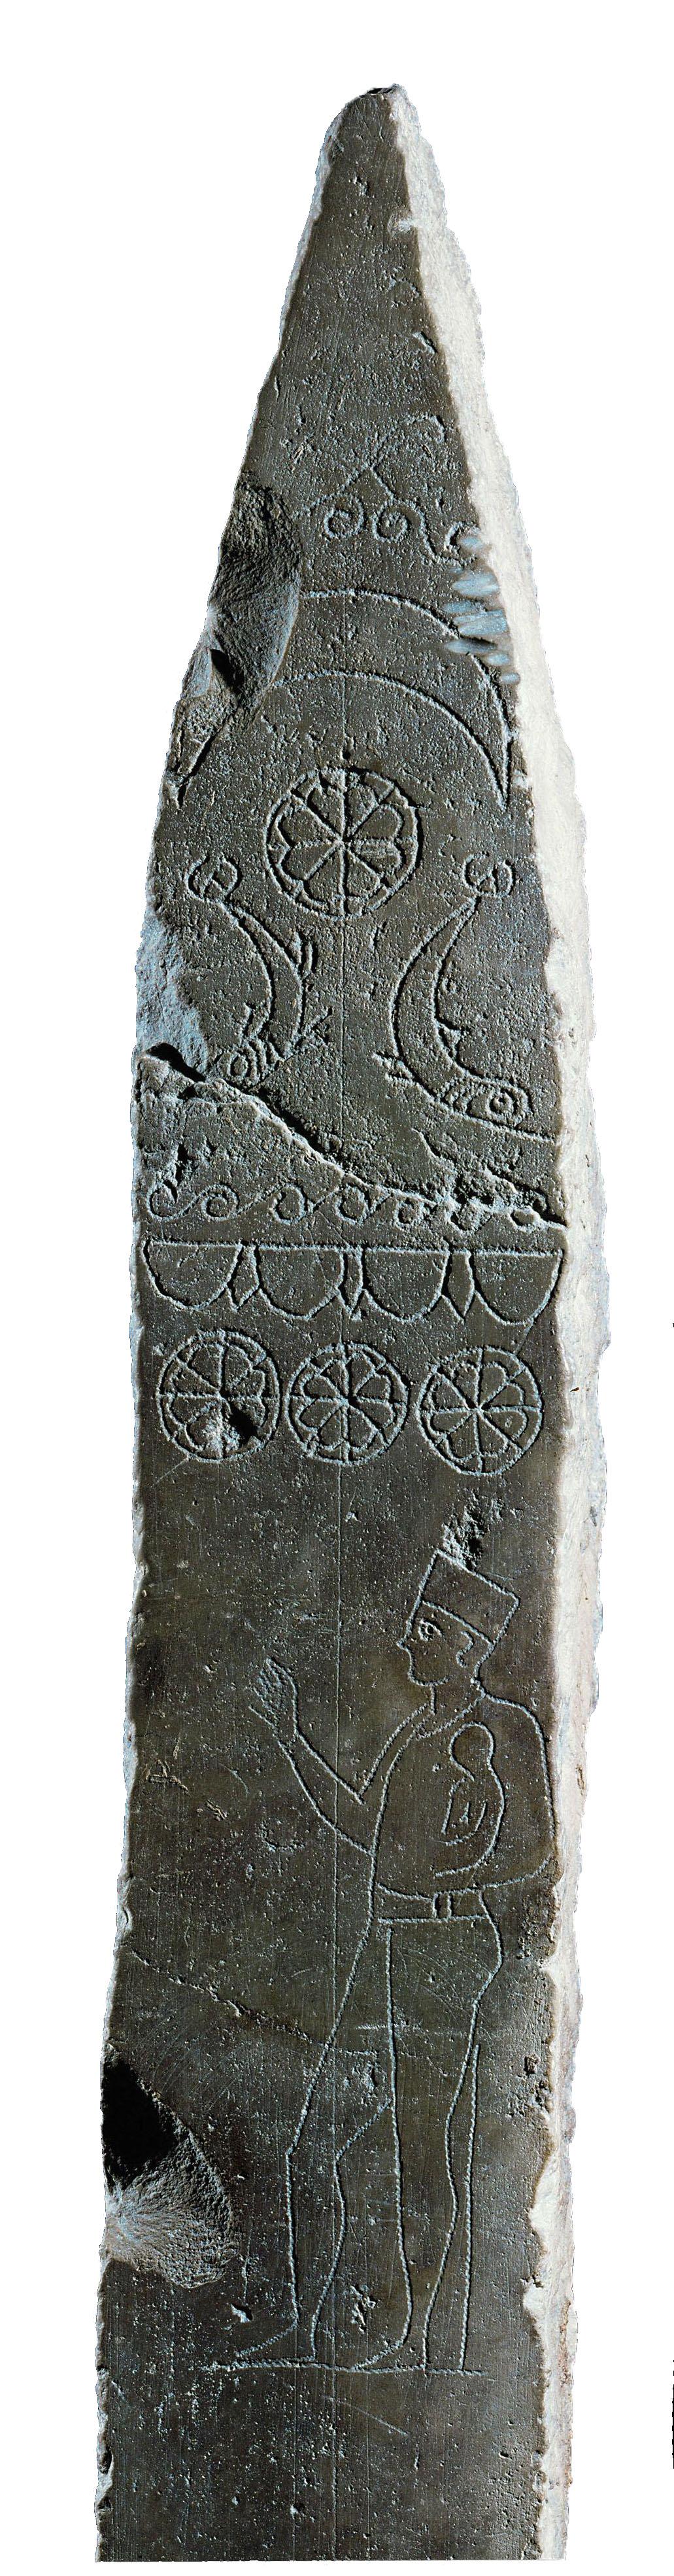 Stela with images of celestial shapes on top and man holding small child below.